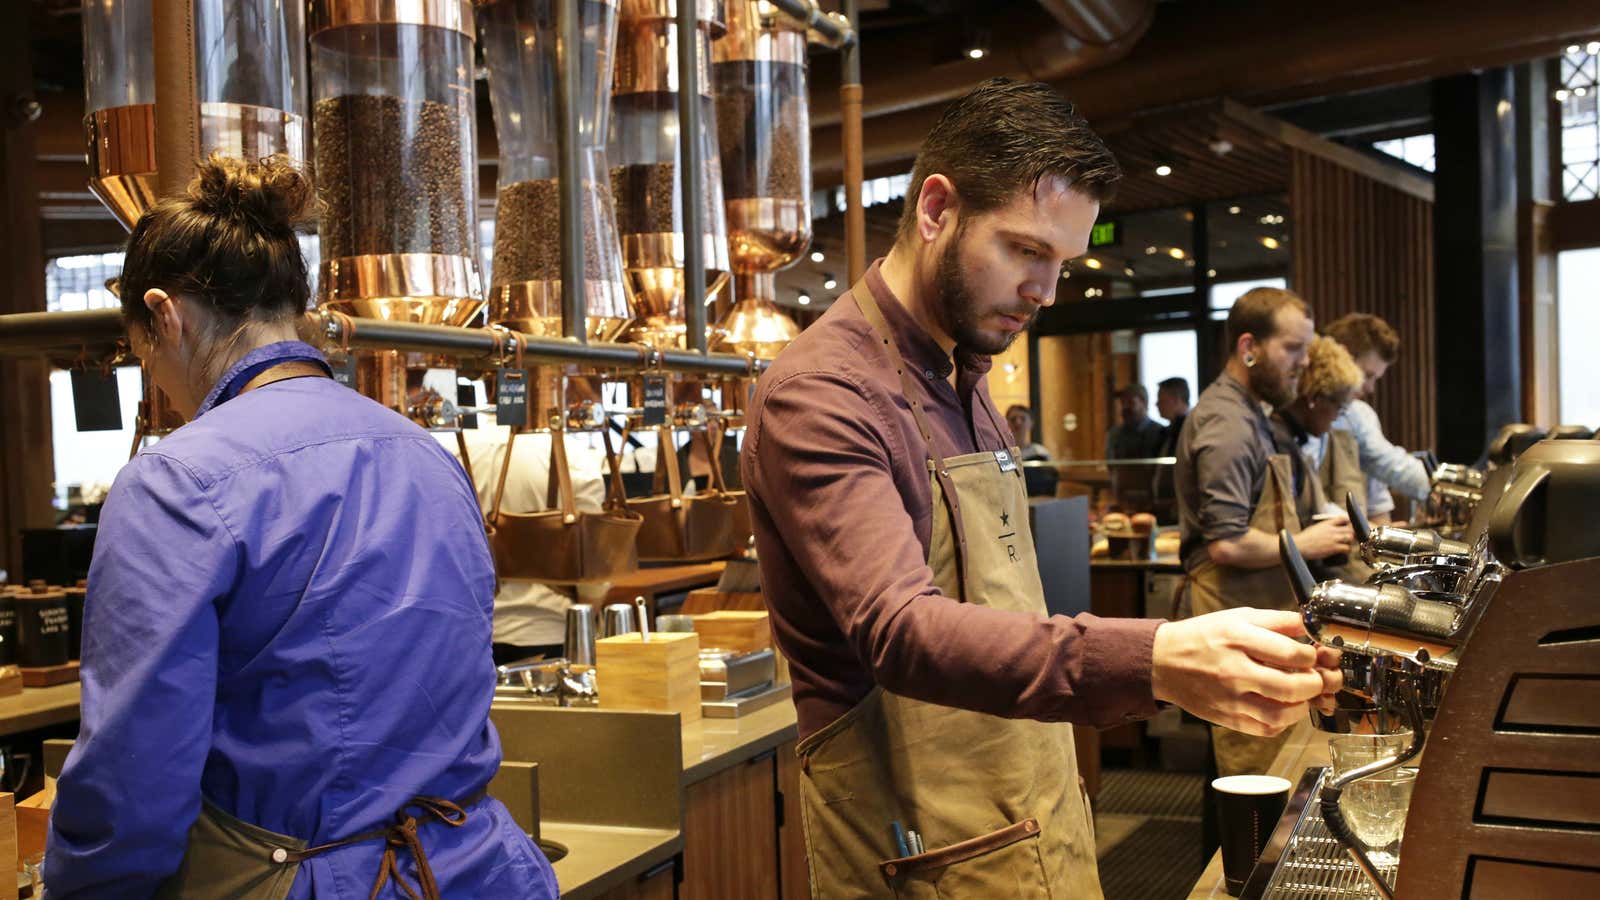 Starbucks plans to open a new roastery location in New York in 2016.